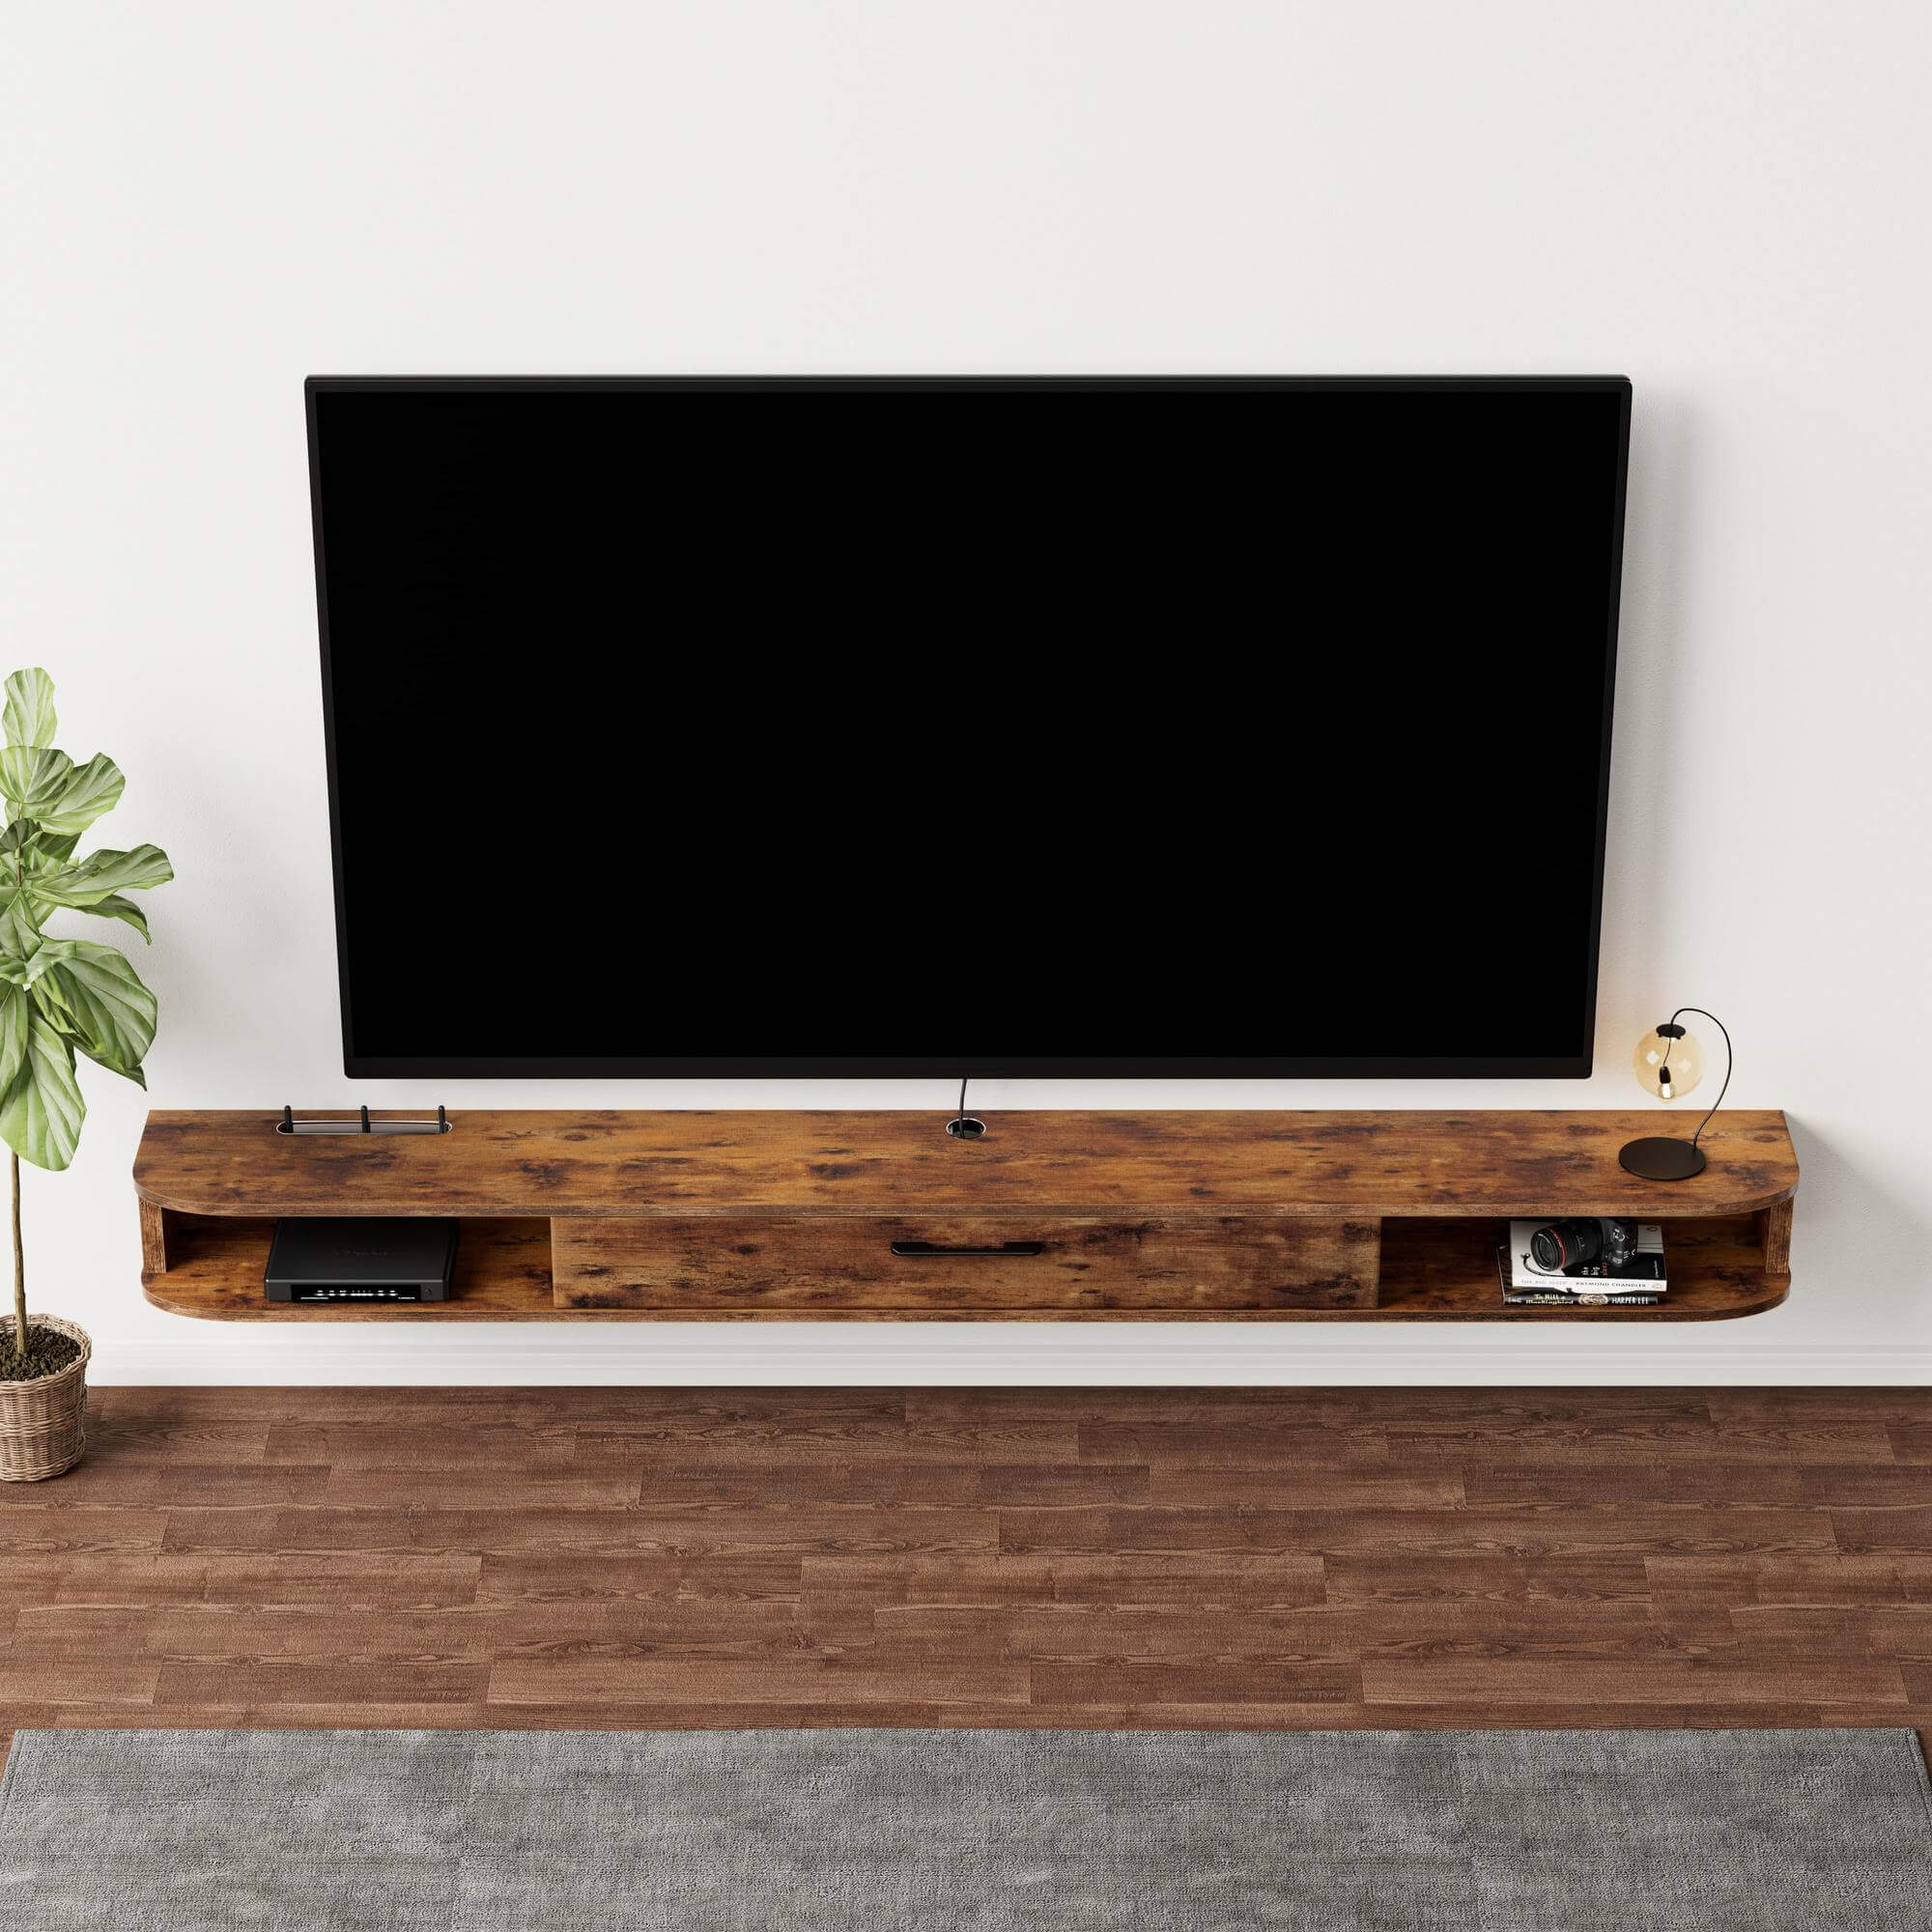 78.74" Rustic Brown Plywood Slim Floating TV Stand Wall Shelf for 85" TV